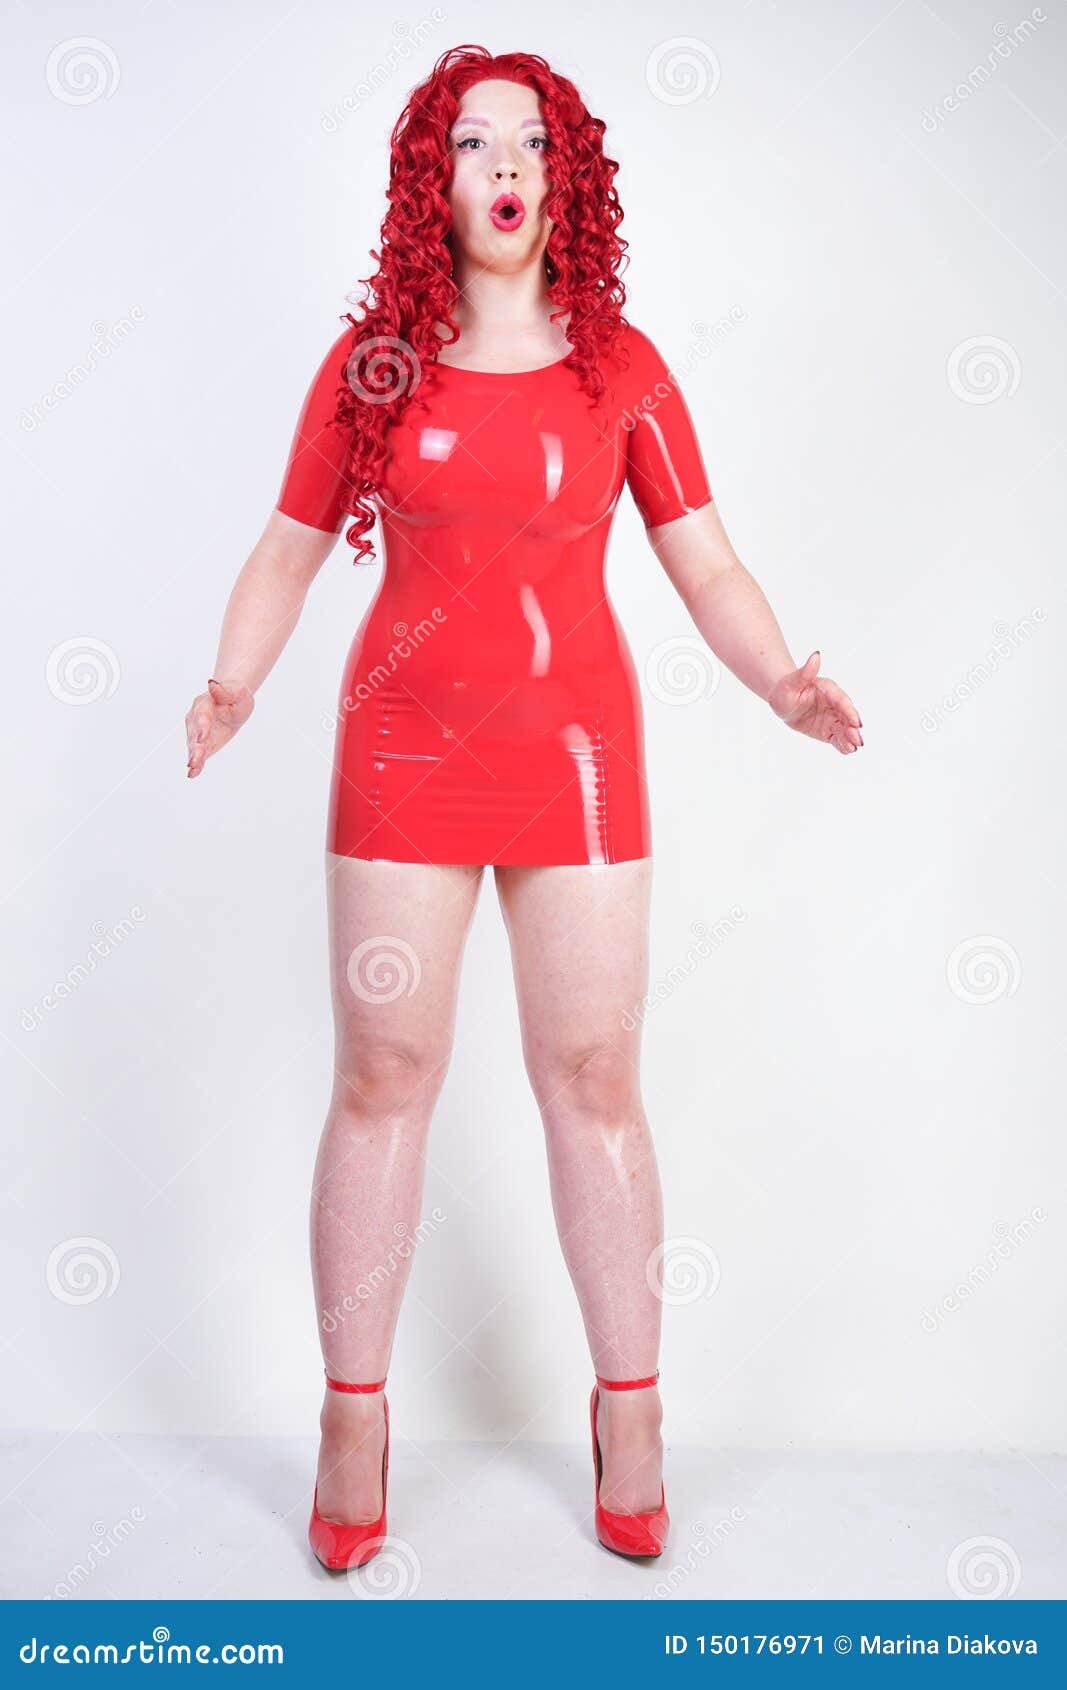 landen Triatleet Losjes Real Doll Woman Wearing Red Latex Rubber Dress and Posing on White Studio  Background Alone. Curvy Plus Size Adult Girl Standing As Stock Image -  Image of life, doll: 150176971